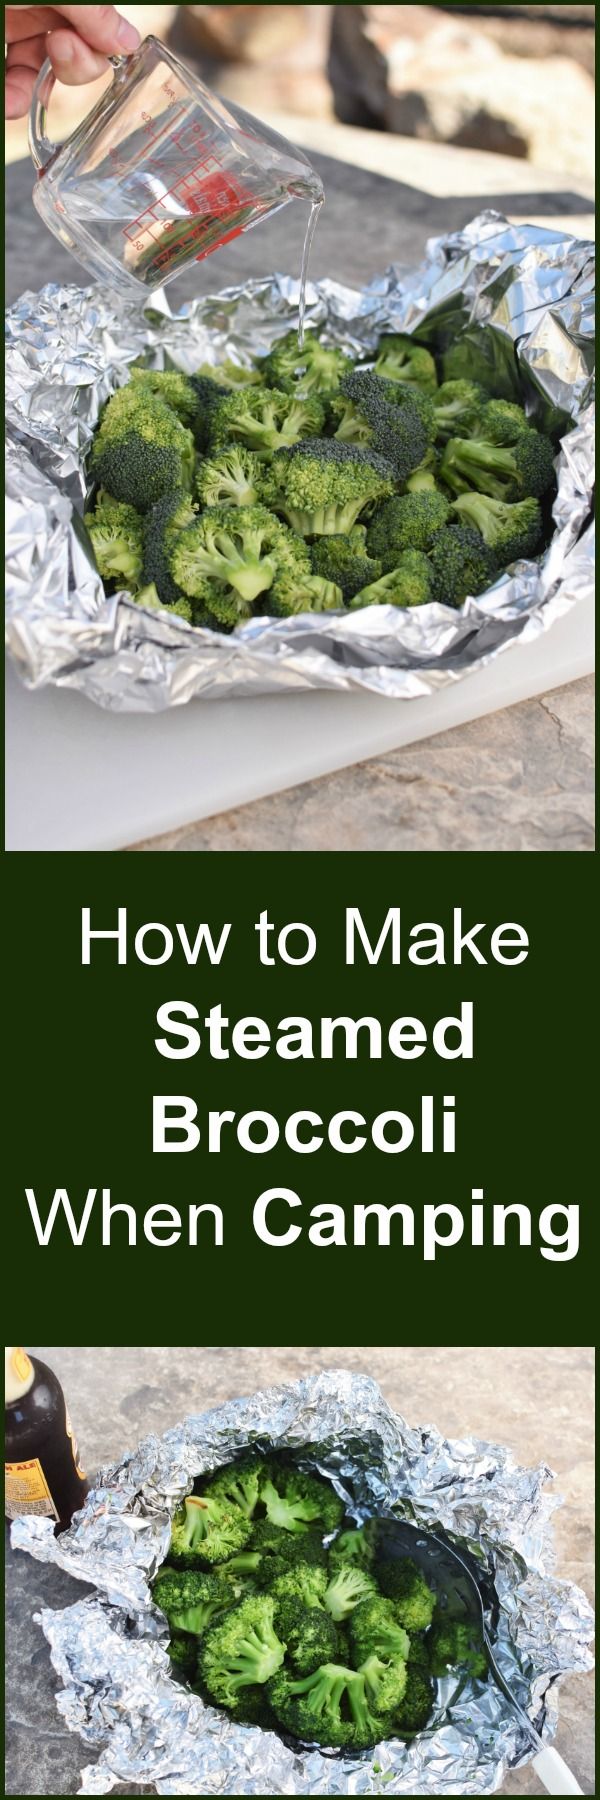 Steamed Broccoli is a great Camping Food